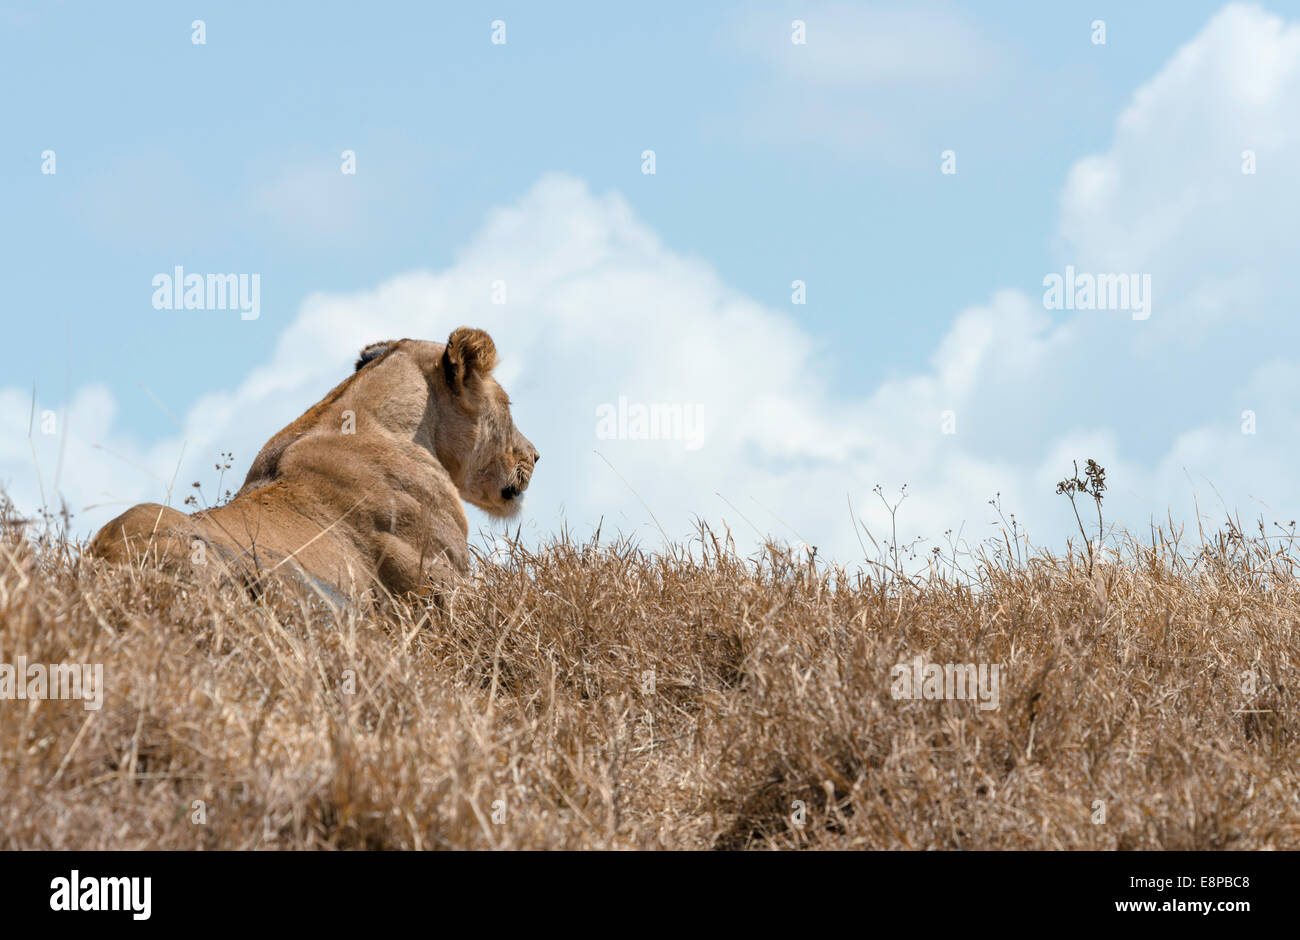 Lioness gazing out from a hilltop with blue sky and clouds in the background Stock Photo